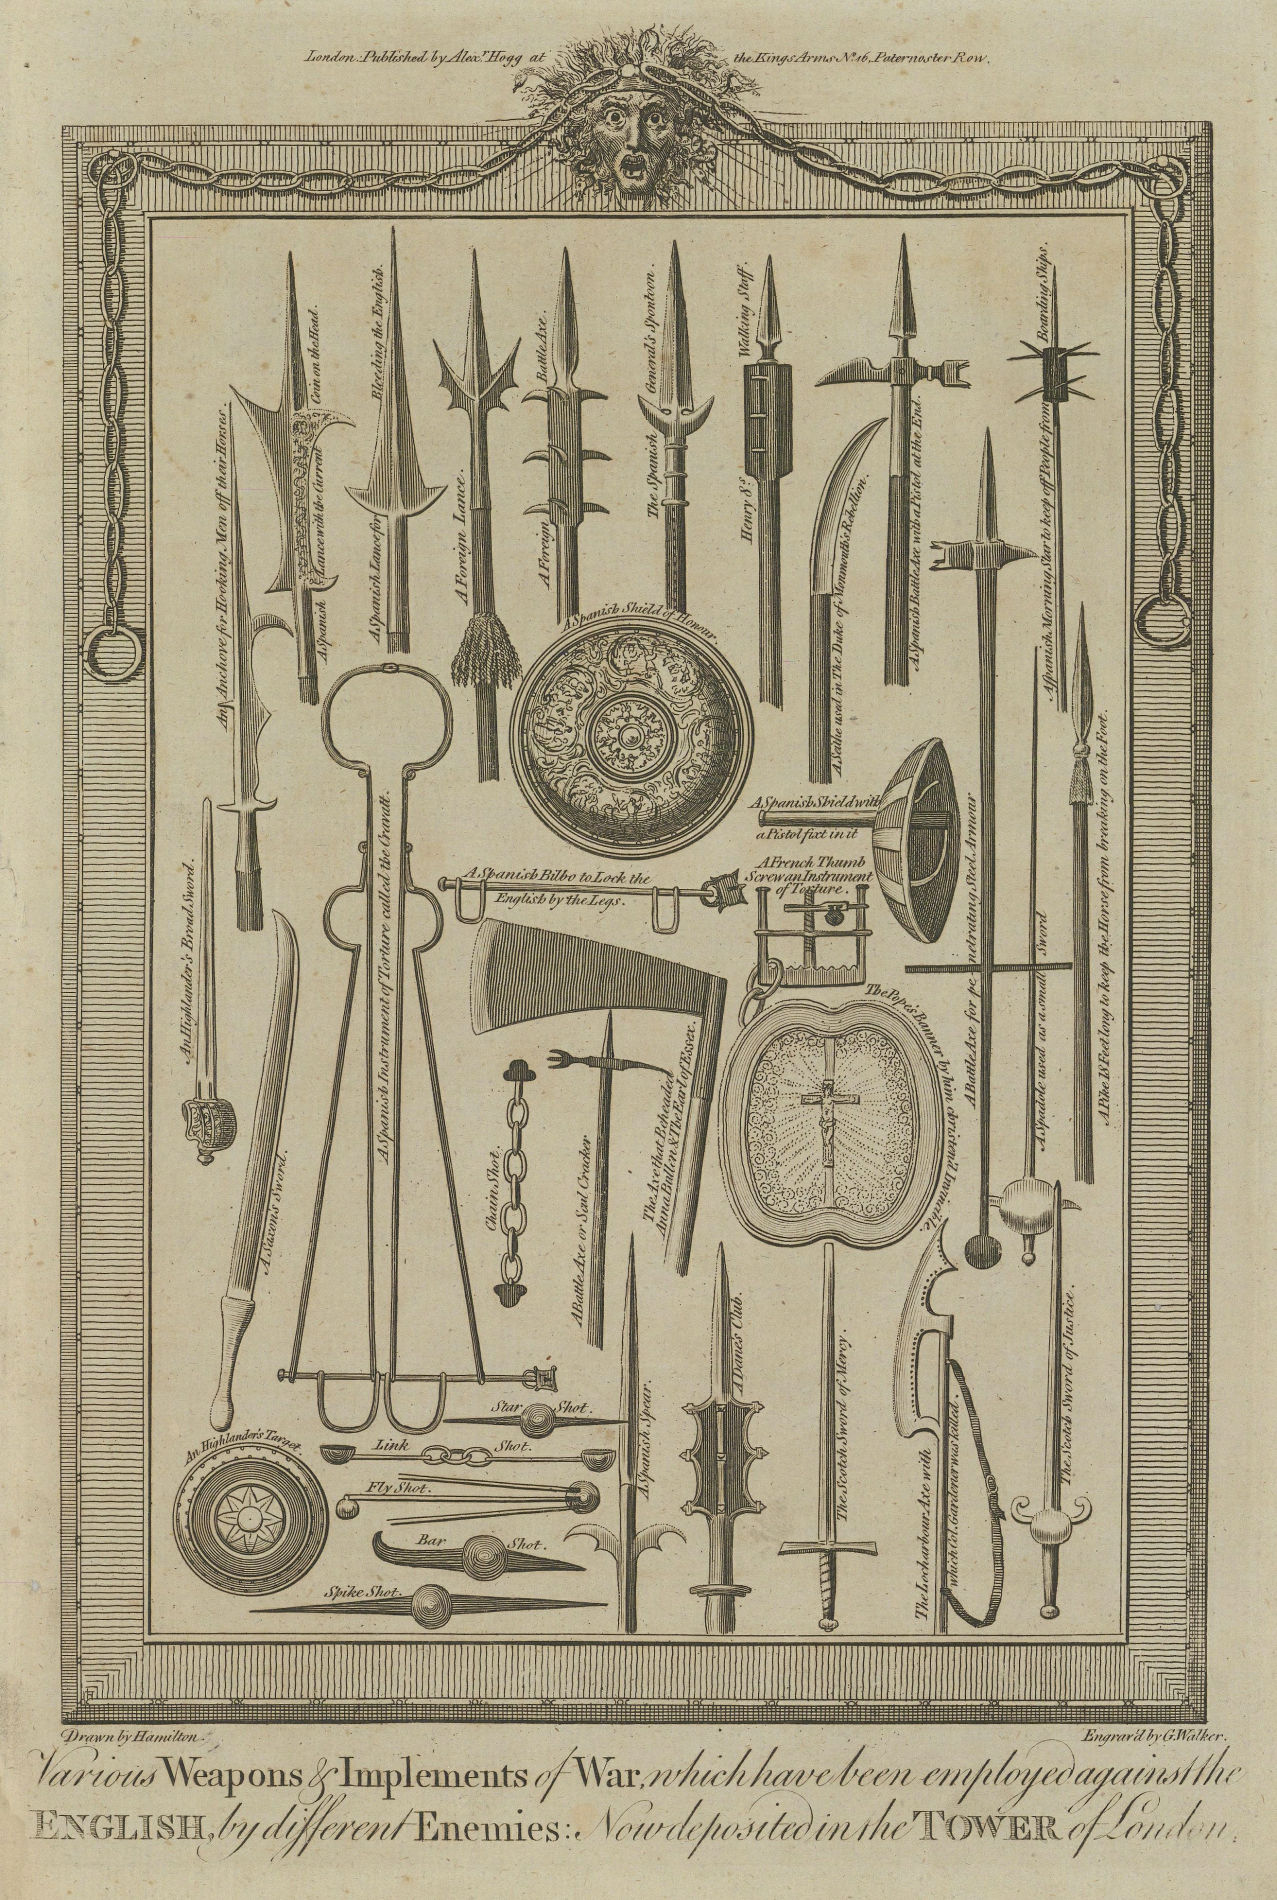 Associate Product Weapons used by enemies of the English. Tower of London Armoury. THORNTON 1784